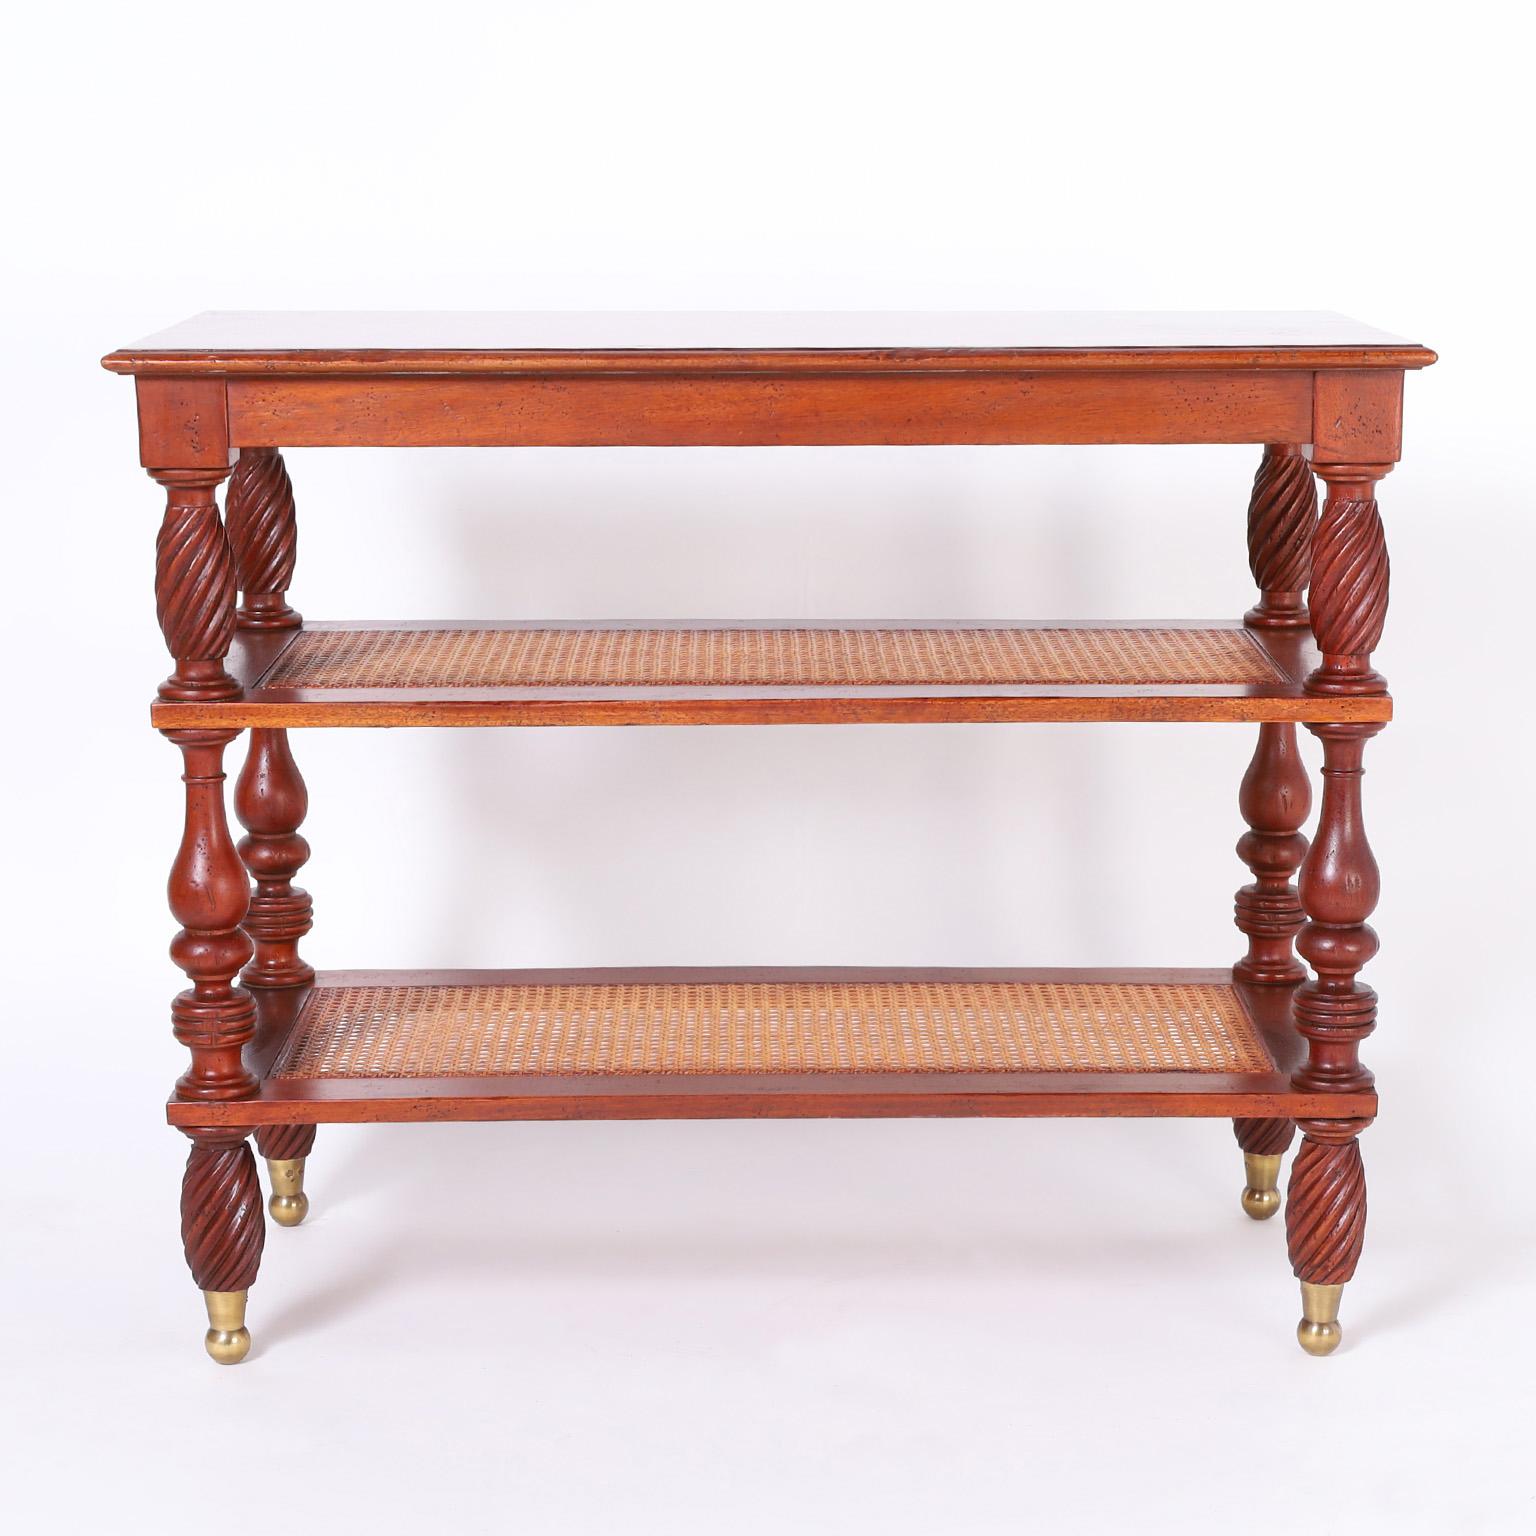 Handsome British Colonial style stand crafted in mahogany with a flame cut top and two lower caned tiers having turned and twisted supports on brass feet. Signed Milling Road Baker on the bottom.